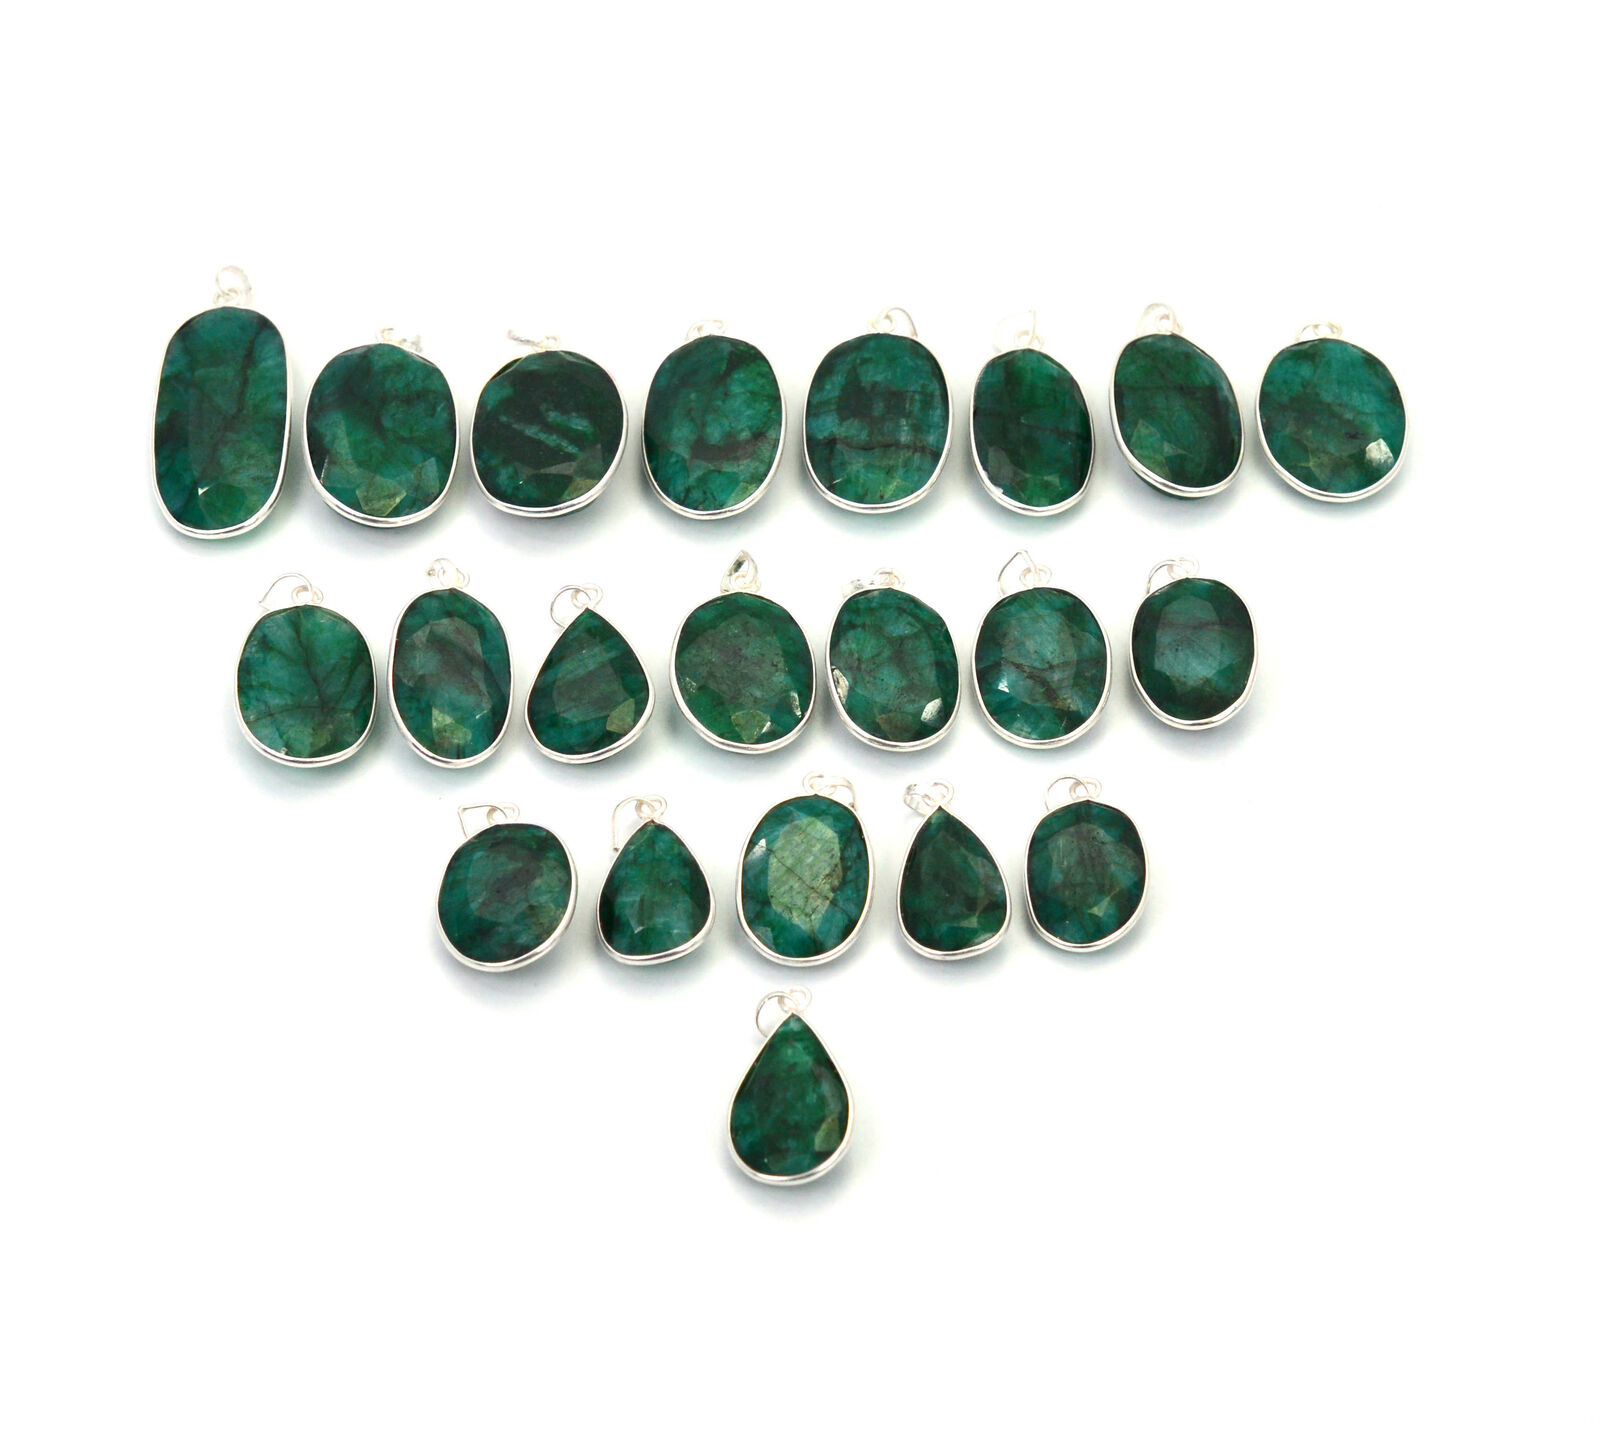 Wholesale 21pc 925 Solid Sterling Silver Faceted Green Emerald Pendant Lot V424